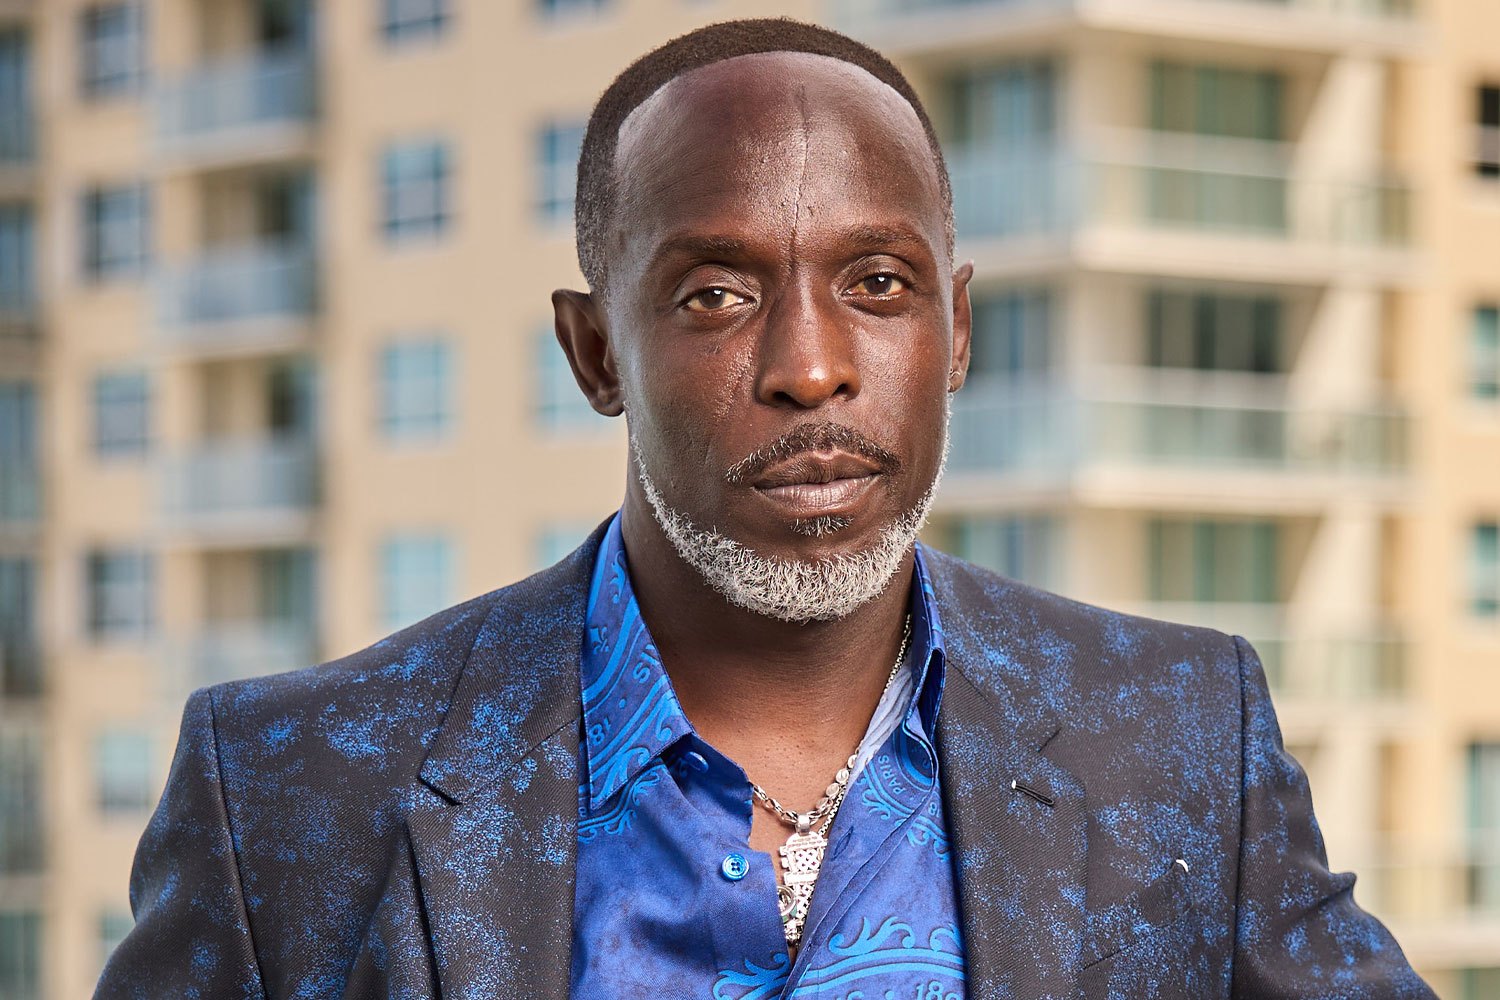 Autopsy confirms actor Michael K Williams died of accidental drug overdose